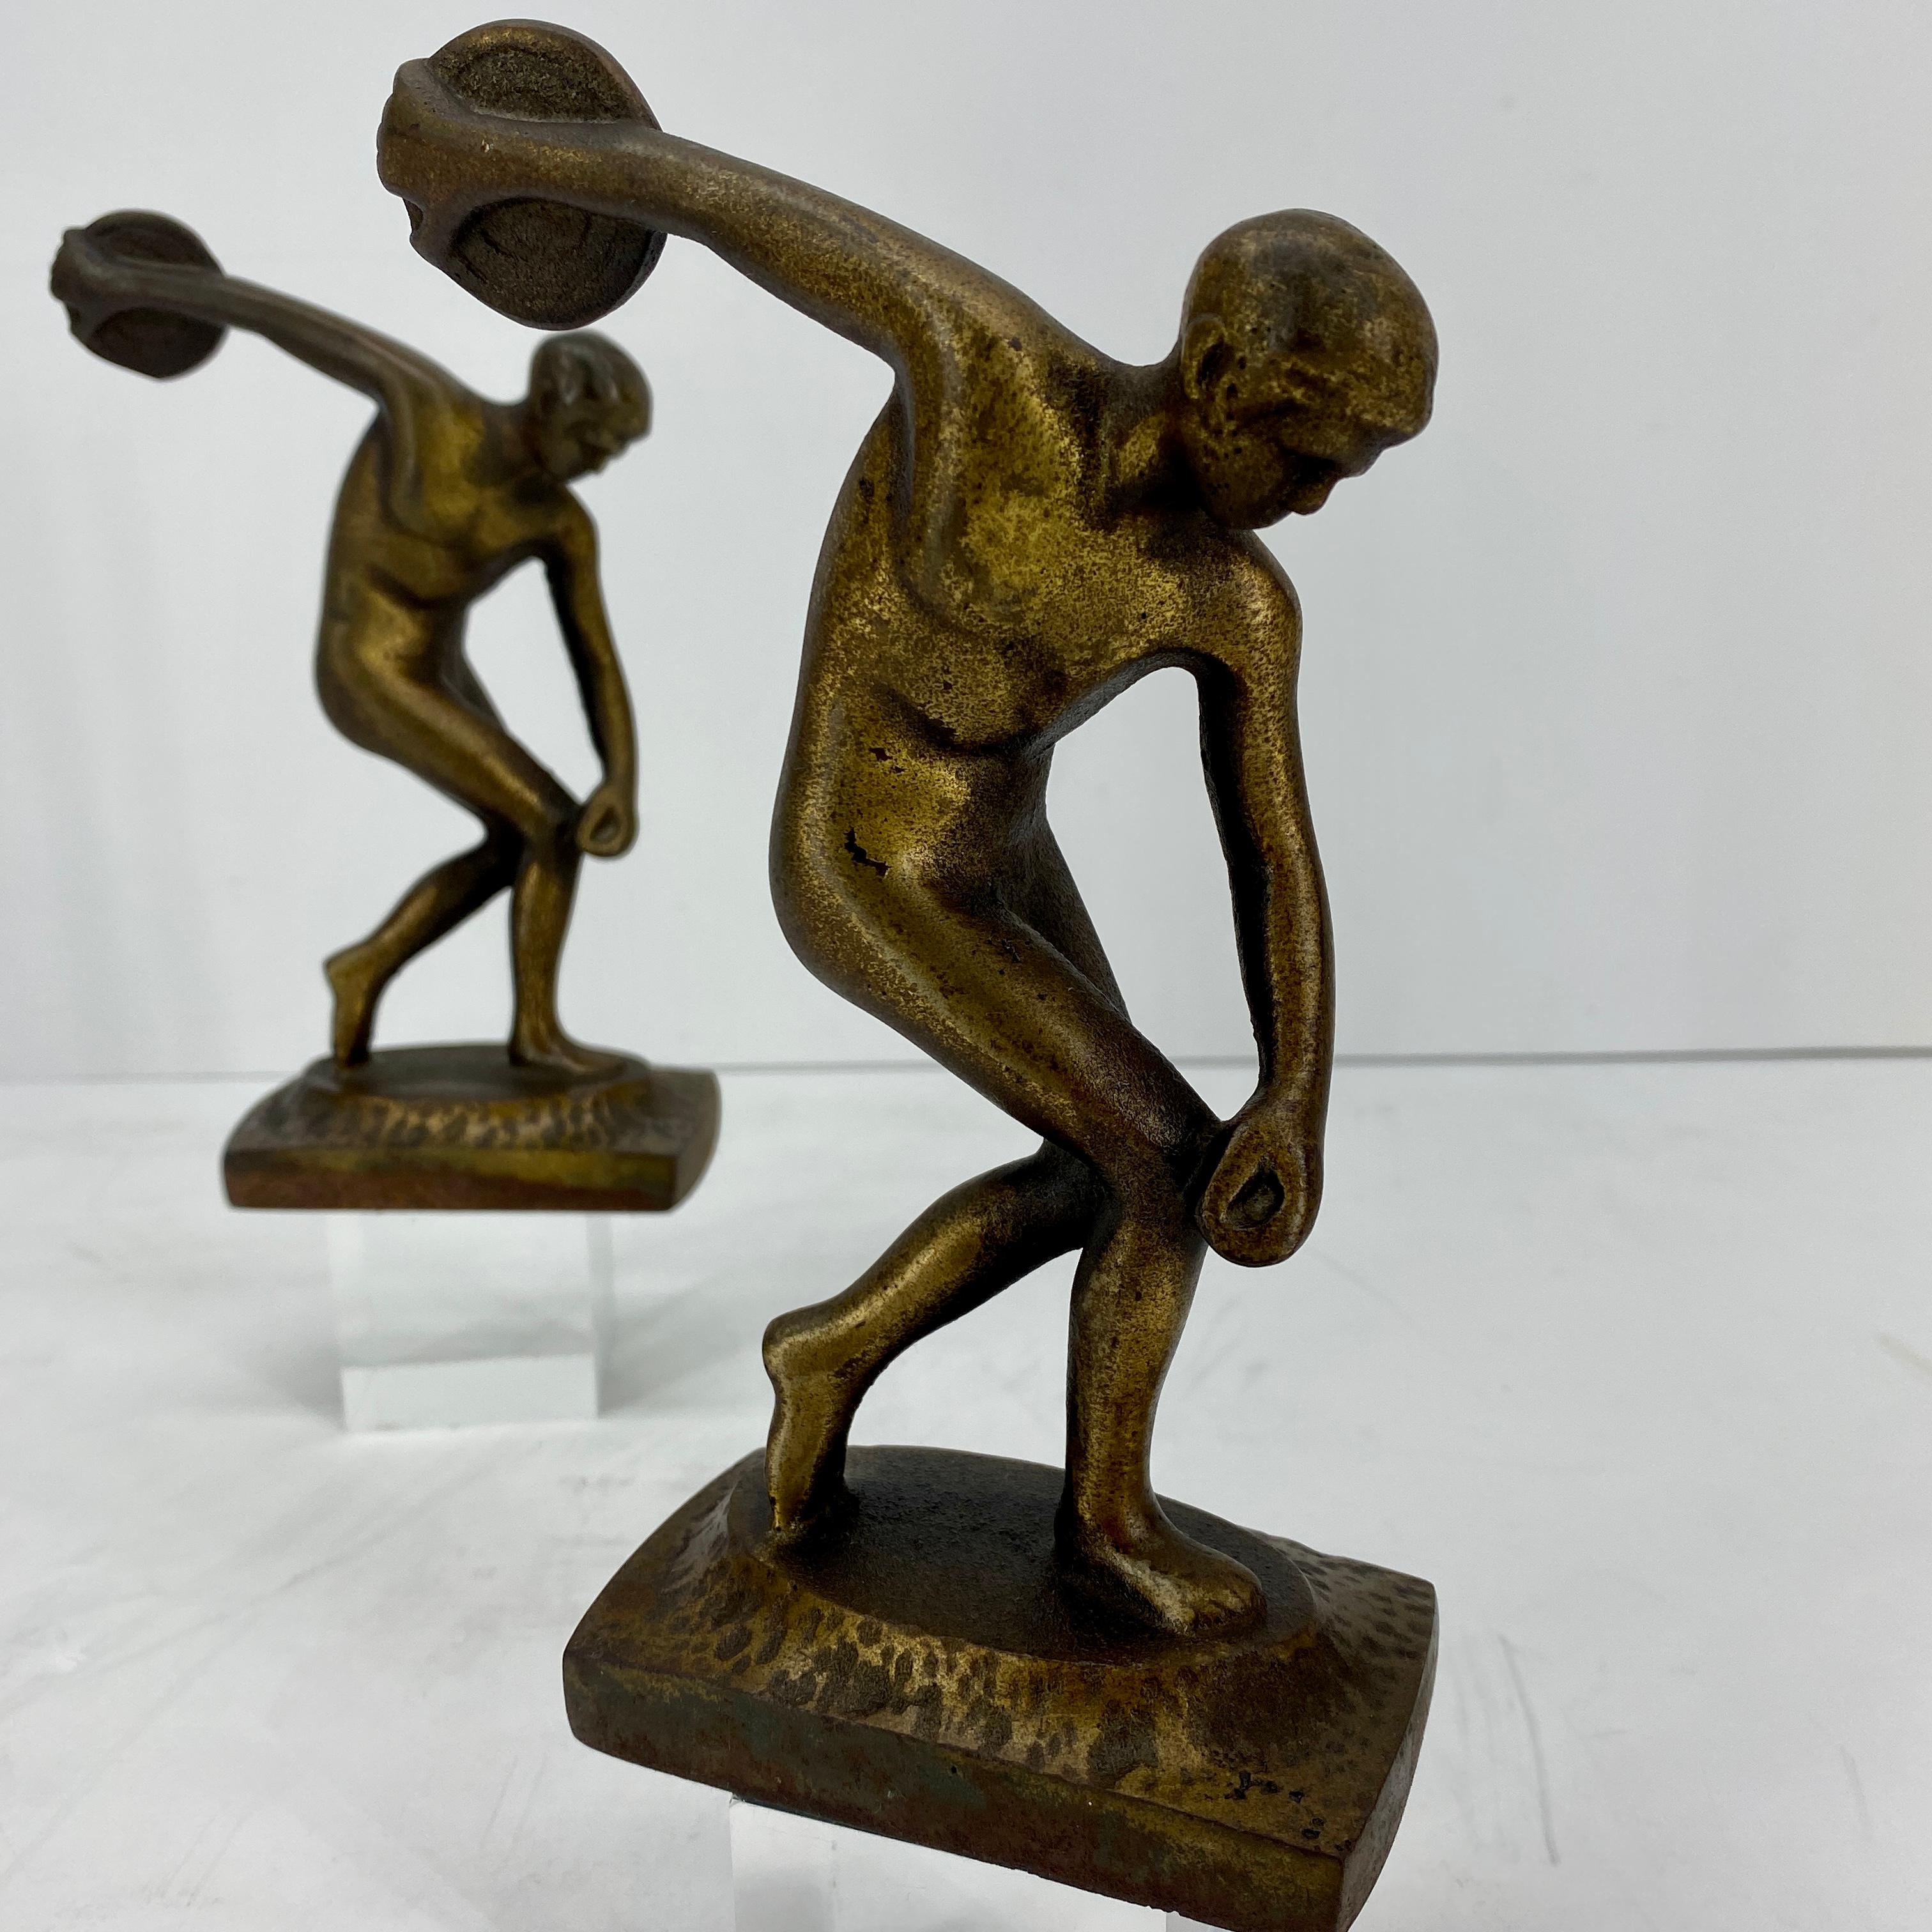 Mid-Century Modern Vintage Cast Iron and Bronzed Overlay Bookends of Male Discus Thrower